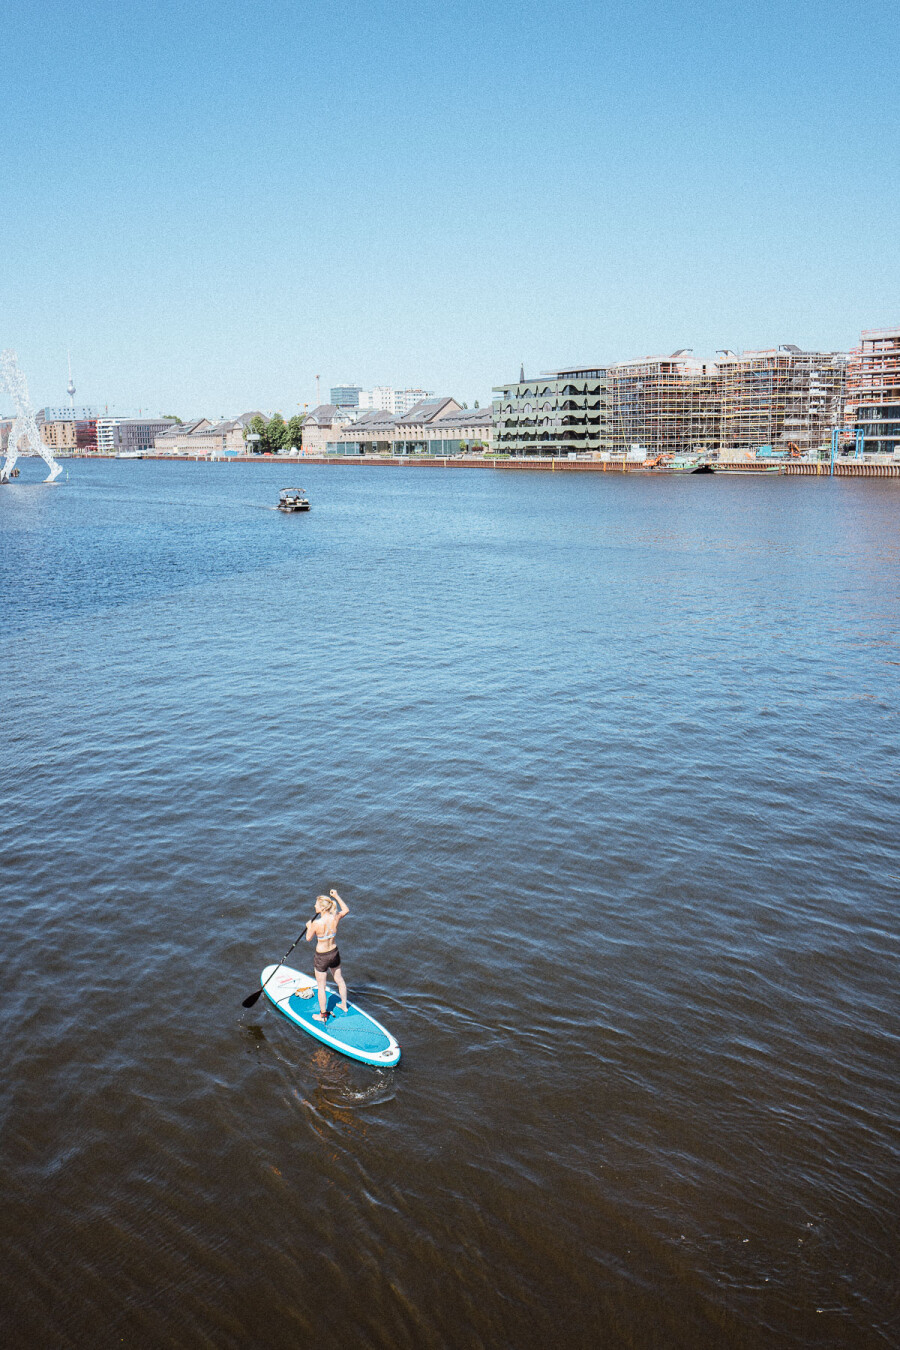 A woman on a stand up paddle on the Spree river